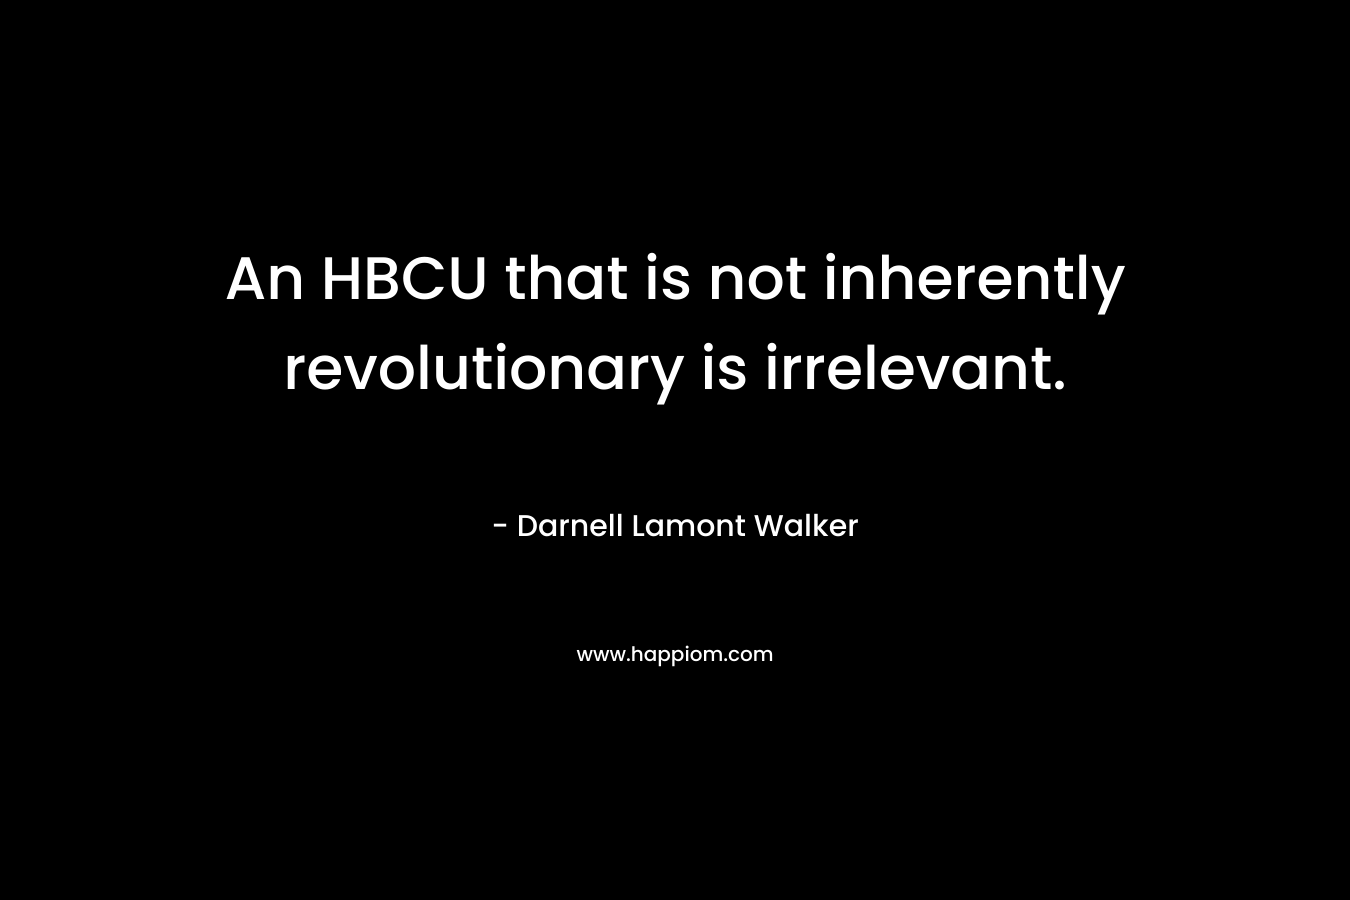 An HBCU that is not inherently revolutionary is irrelevant.